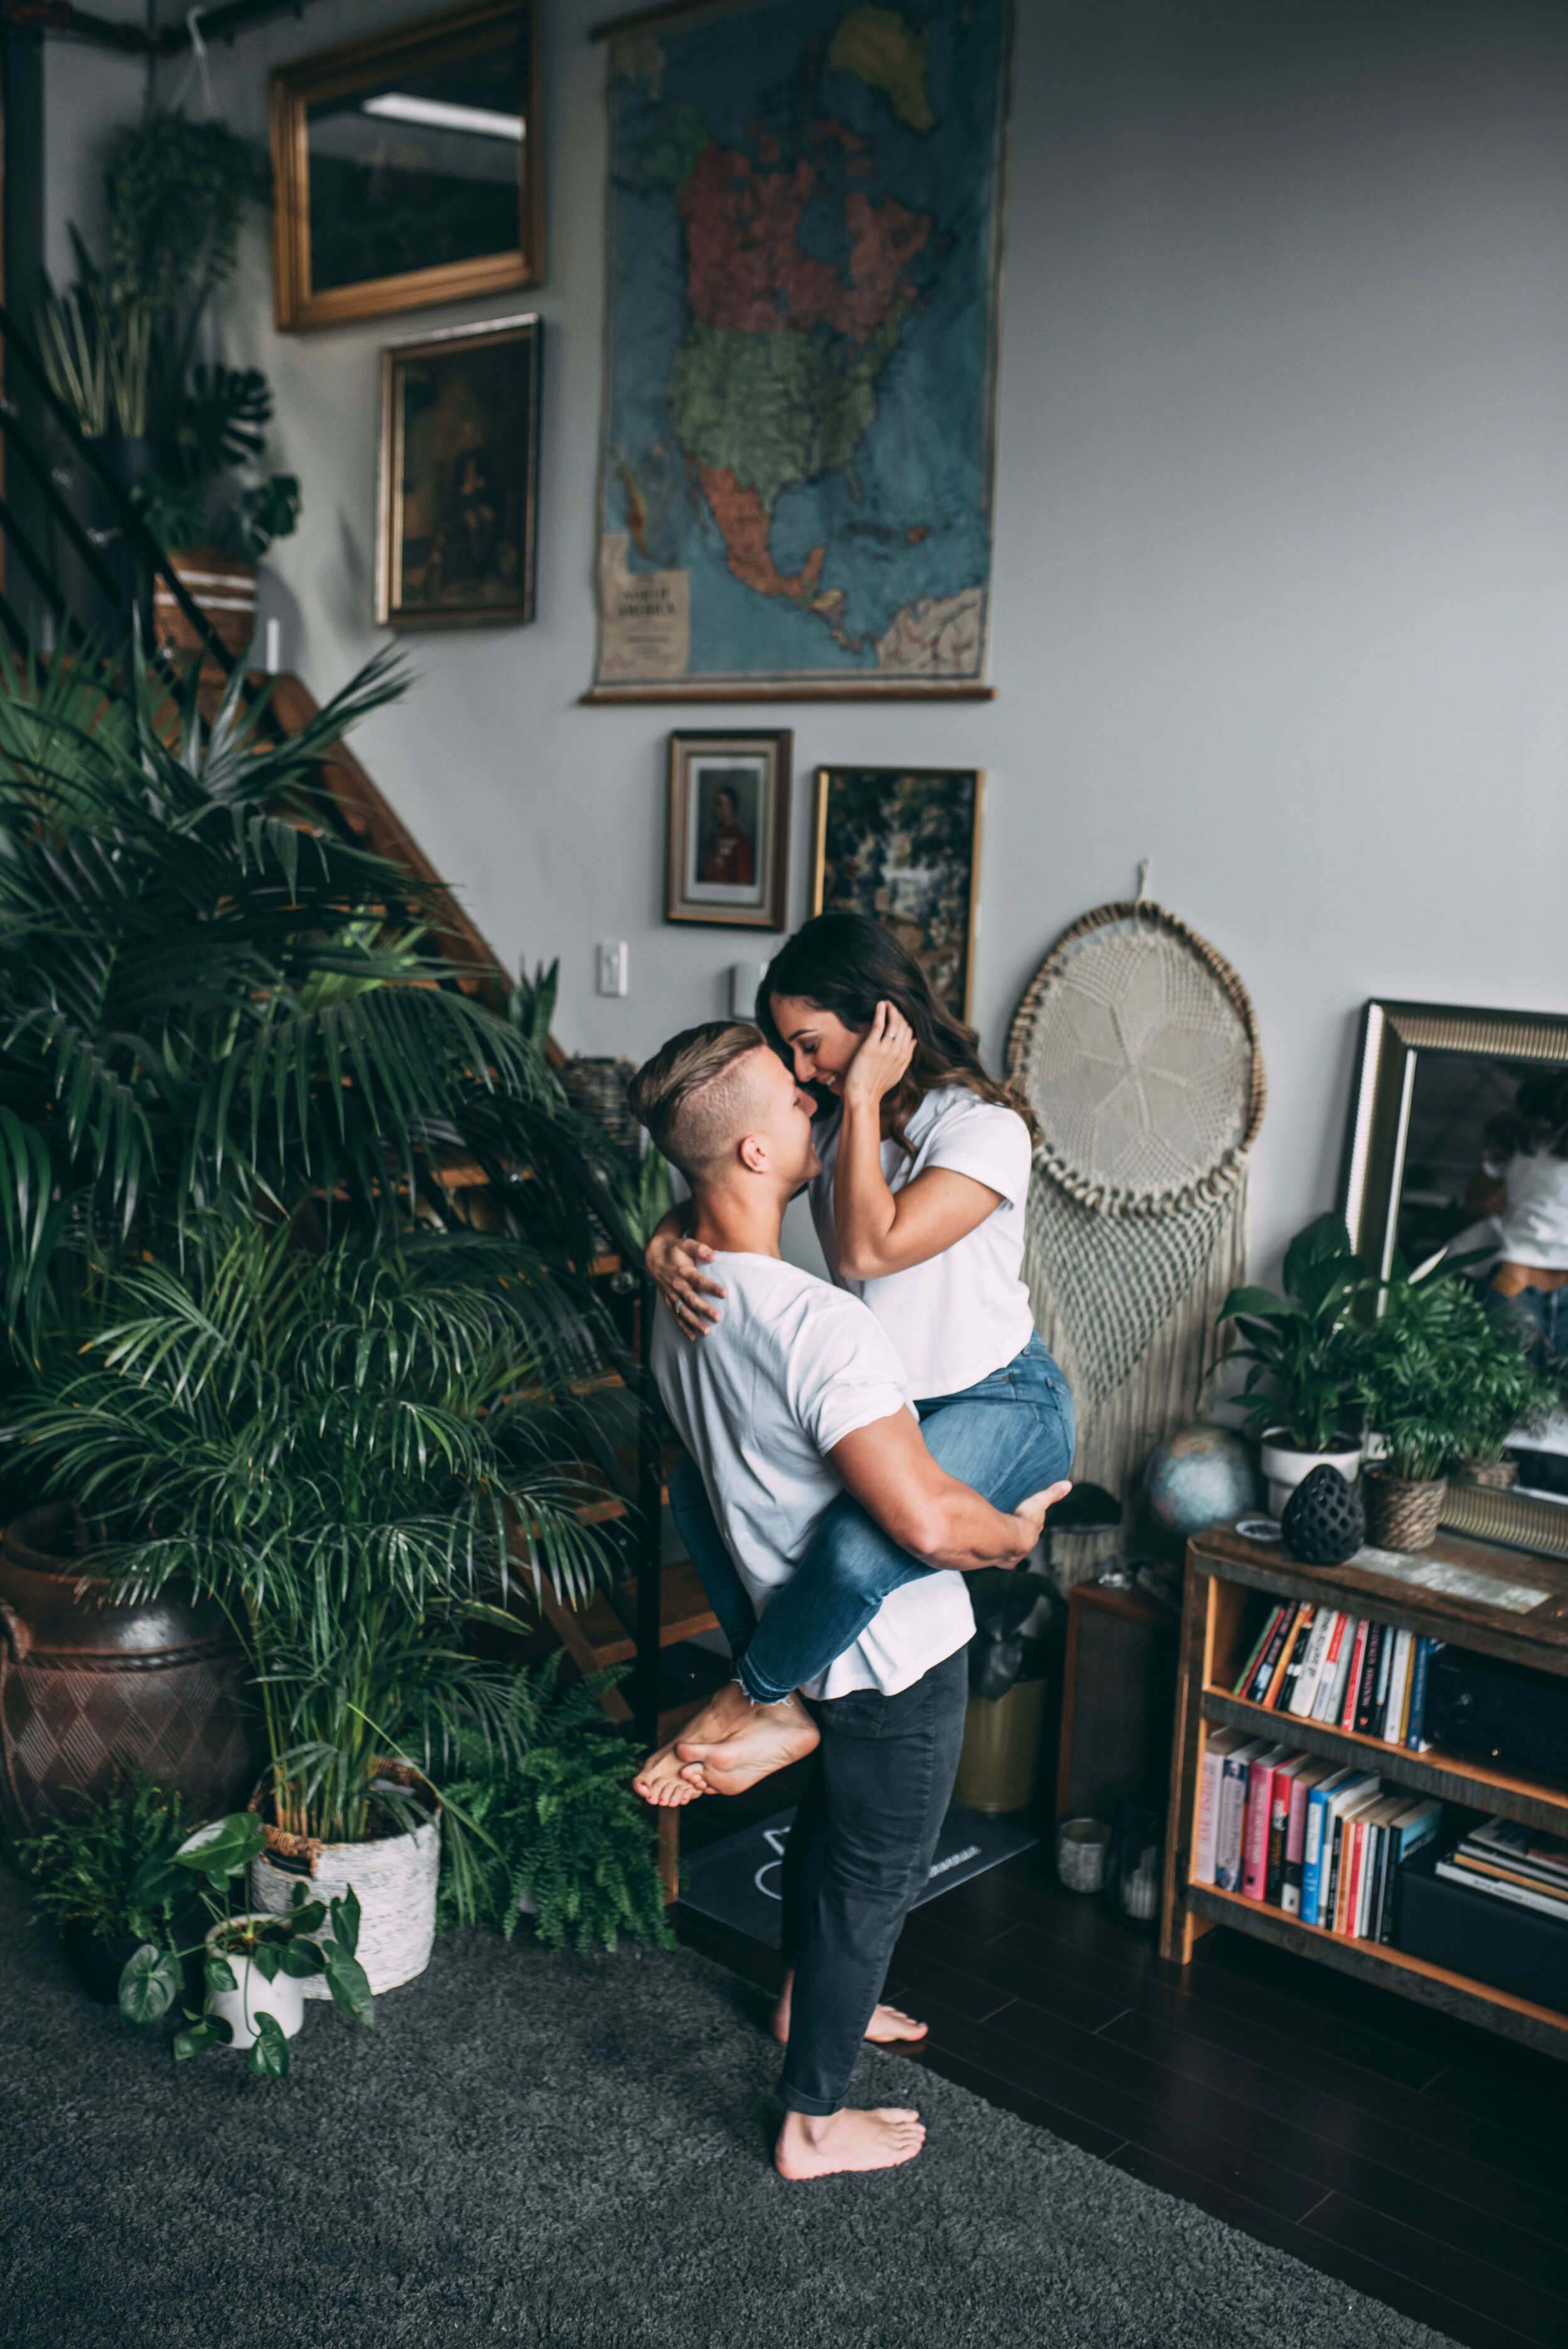 Vancouver Engagement Session - In Home Couples Session - Loft Garden Oasis - Laura Olson Photography - Sunshine Coast BC & Vancouver Wedding & Elopement Photographer7548.jpg